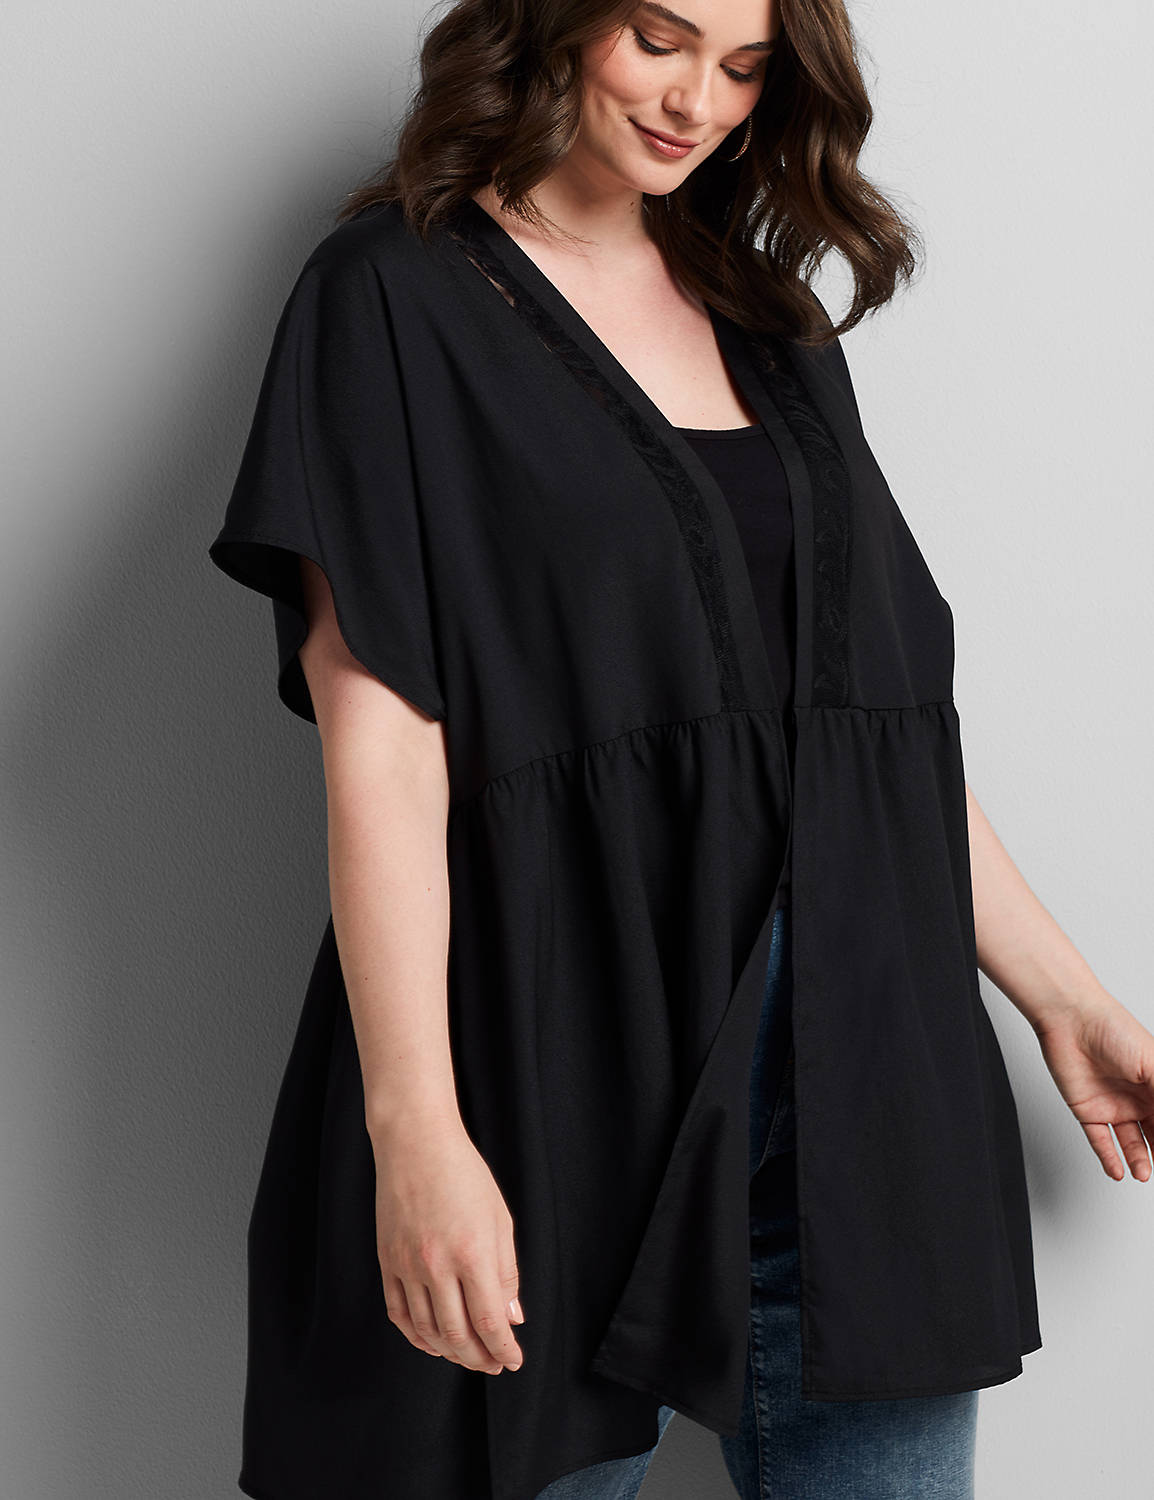 Dolman Sleeve Overpiece Tunic 1114702:Pitch Black LB 1000322:14/16 Product Image 1